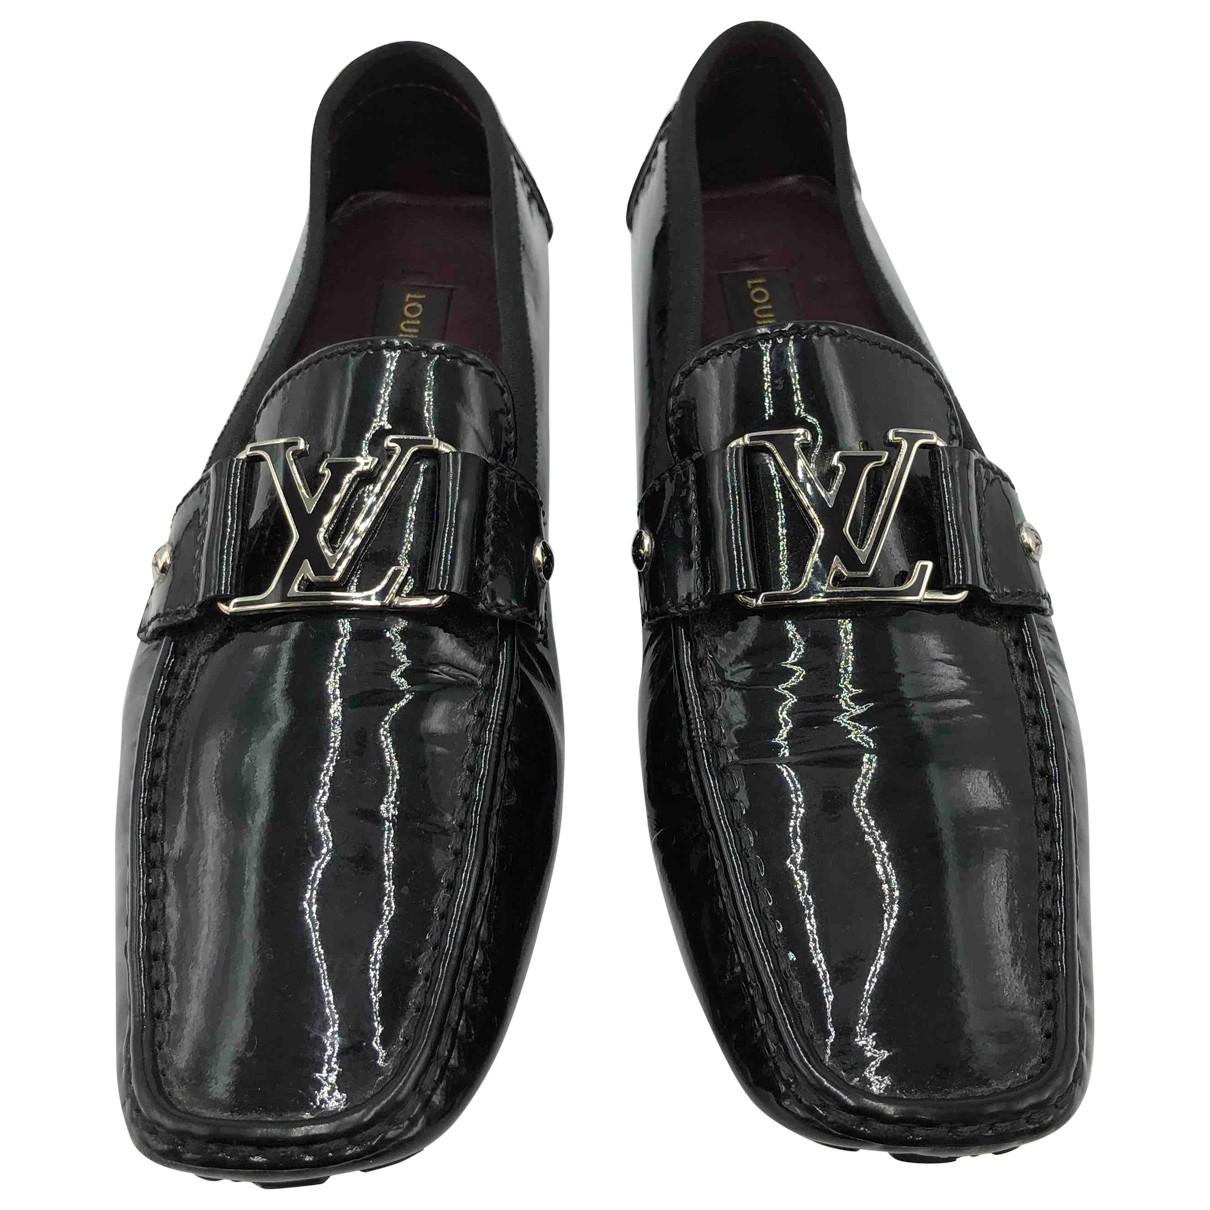 Louis Vuitton Patent Leather Flats in Black for Men - Lyst